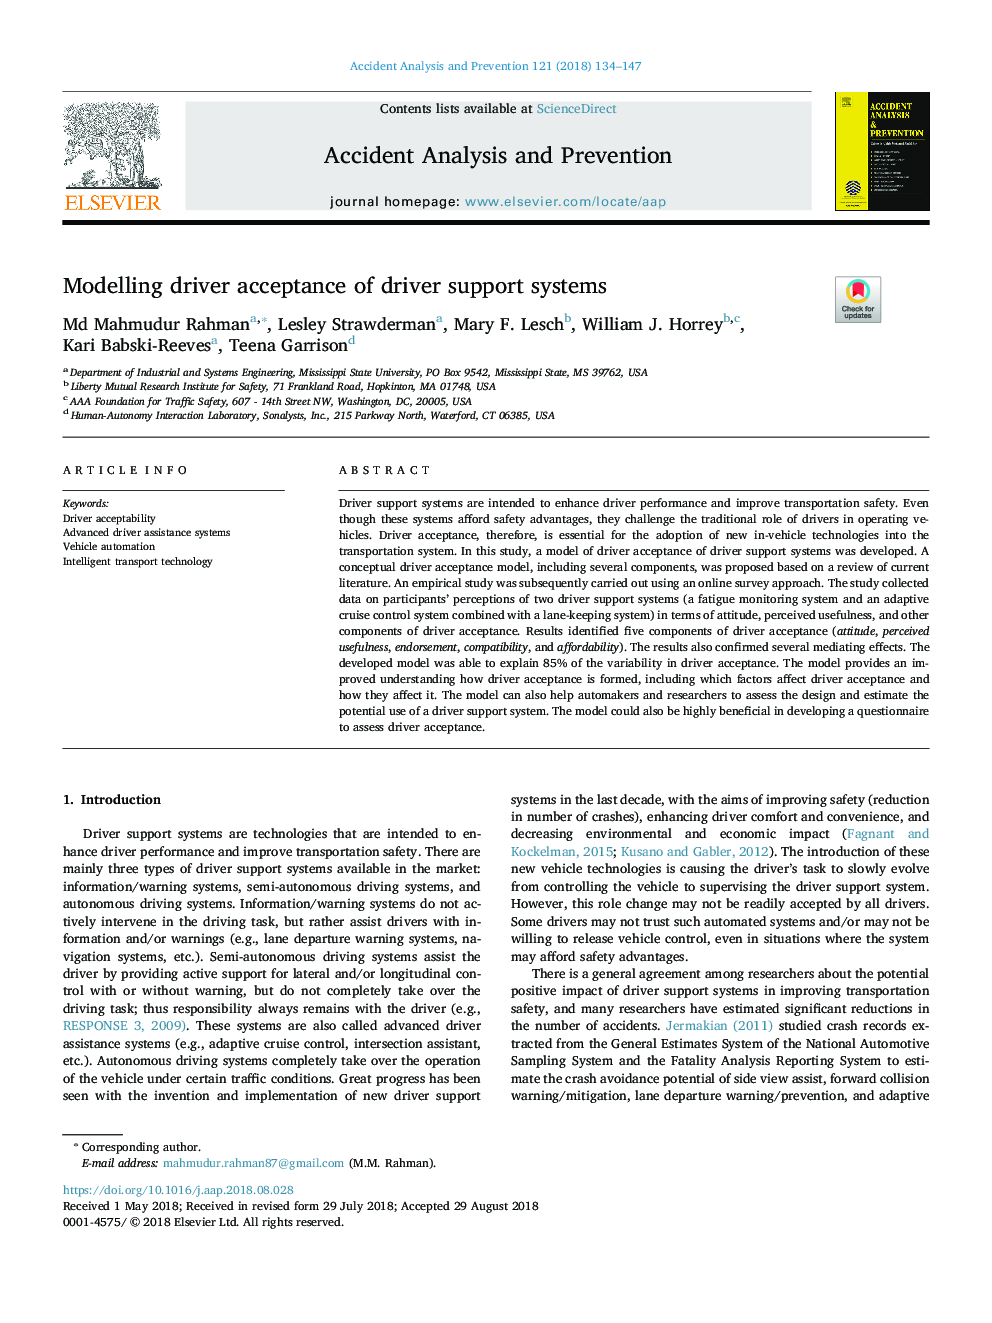 Modelling driver acceptance of driver support systems